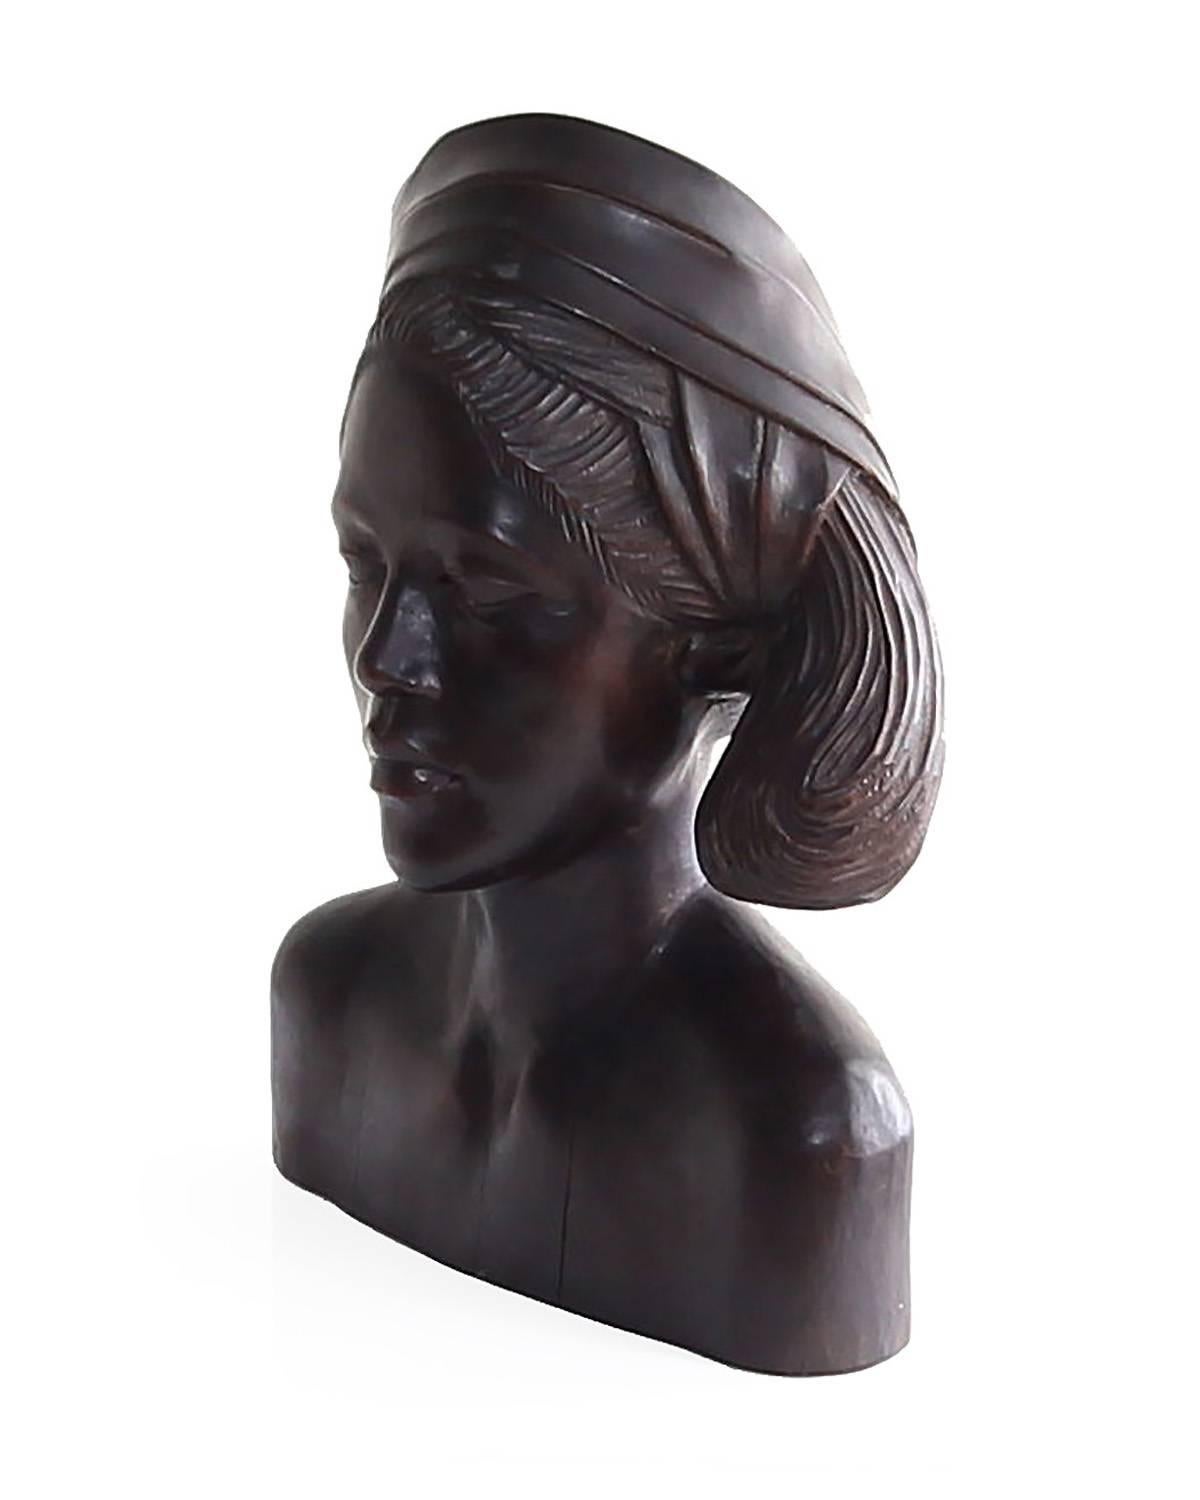 Beautiful carved mahogany wood bust of an Balinese woman wearing a headscarf. This piece is a fine example of traditional wood carving techniques. Powerful specimen with a lot of visual interest and presence. Circa 1950's.


